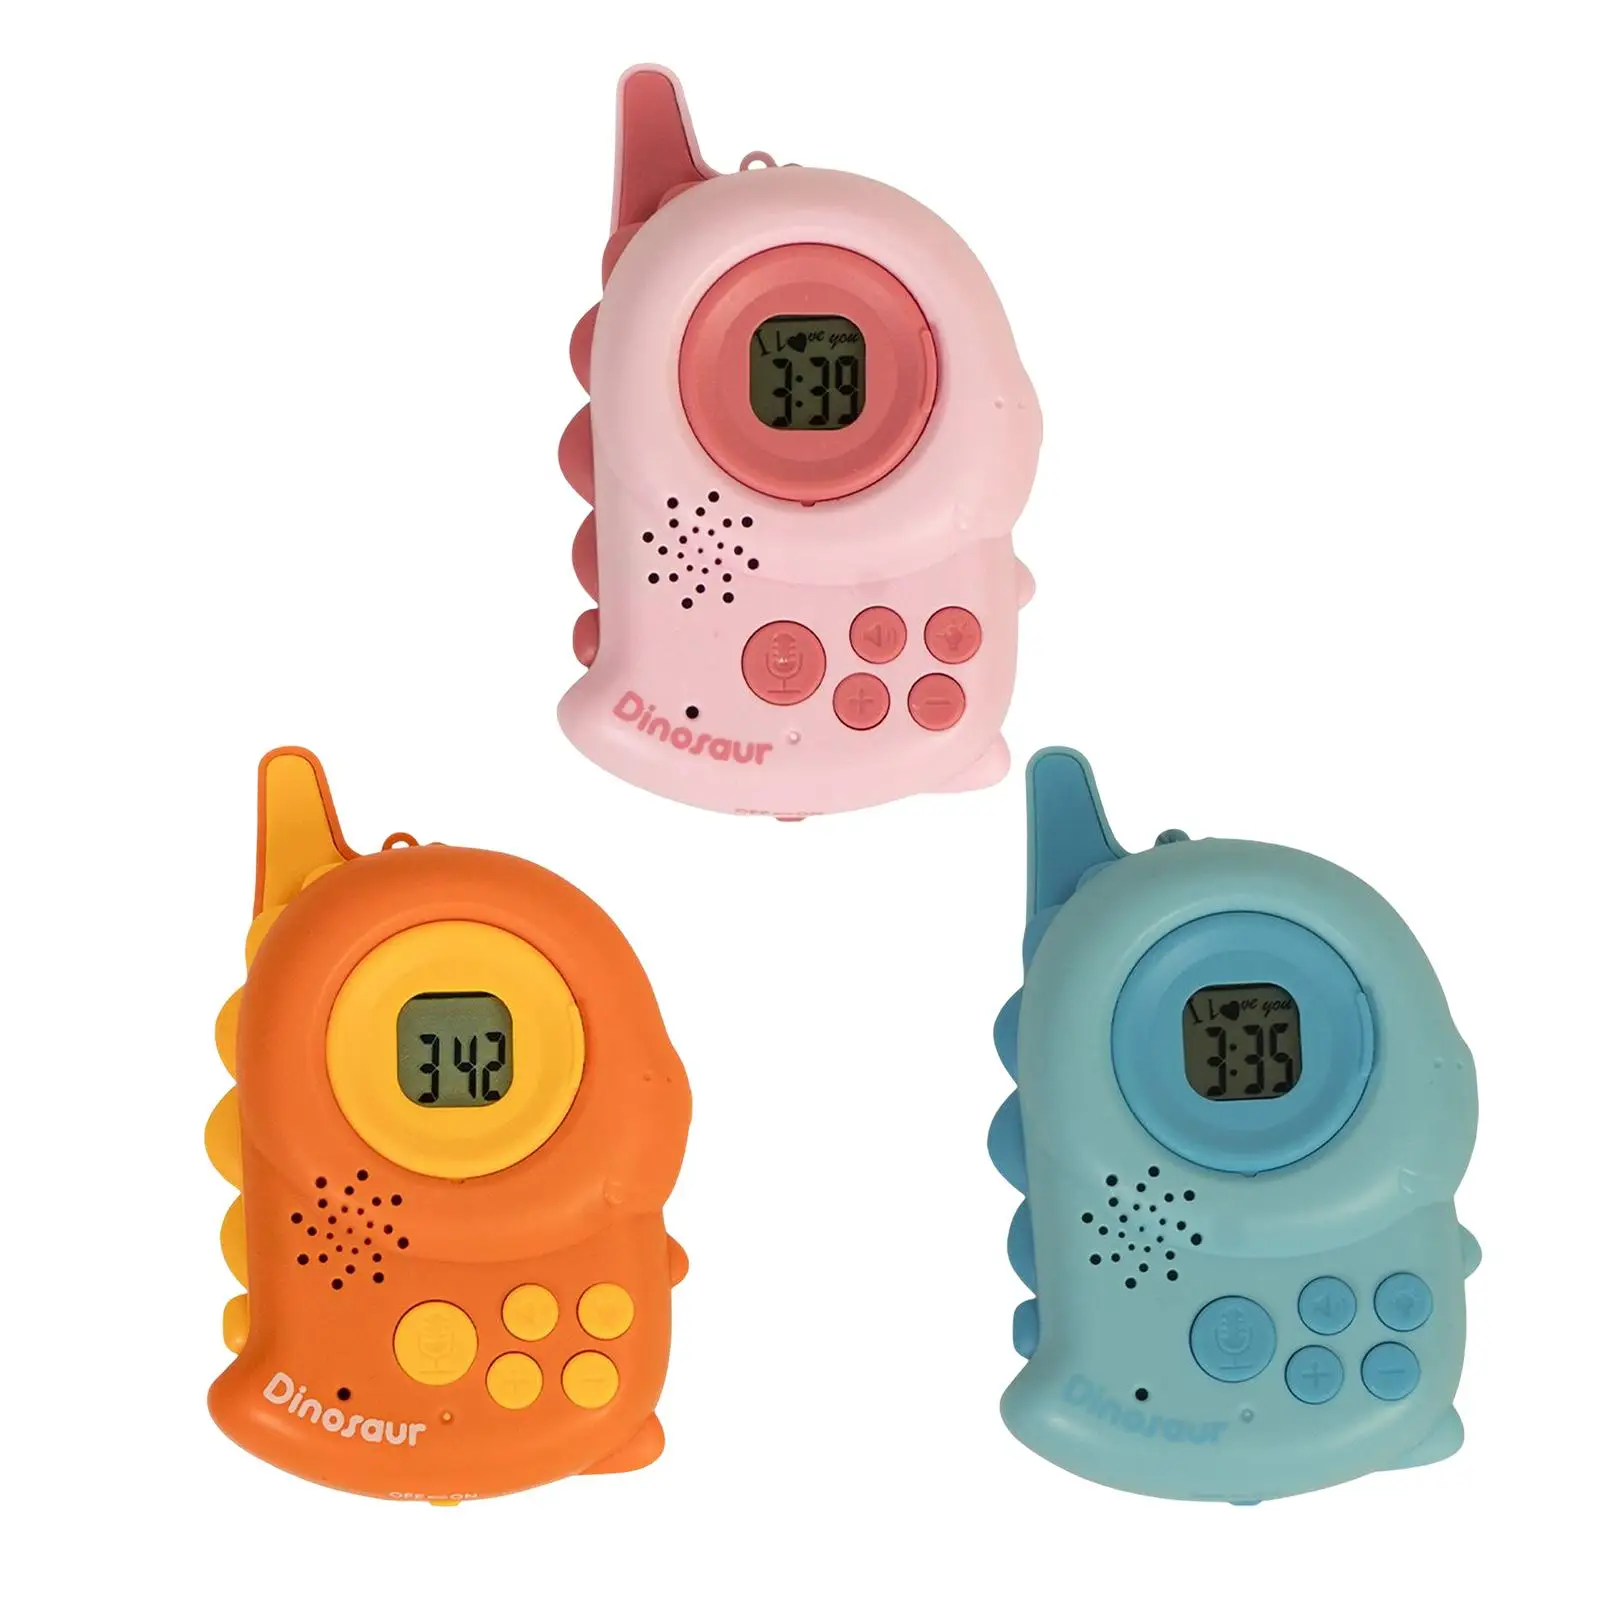 Handheld Walkie Talkies for Kids Adorable Indoor Outdoor Toys Outdoor Camping Games for Spring Summer Outside Boys Girls Gifts